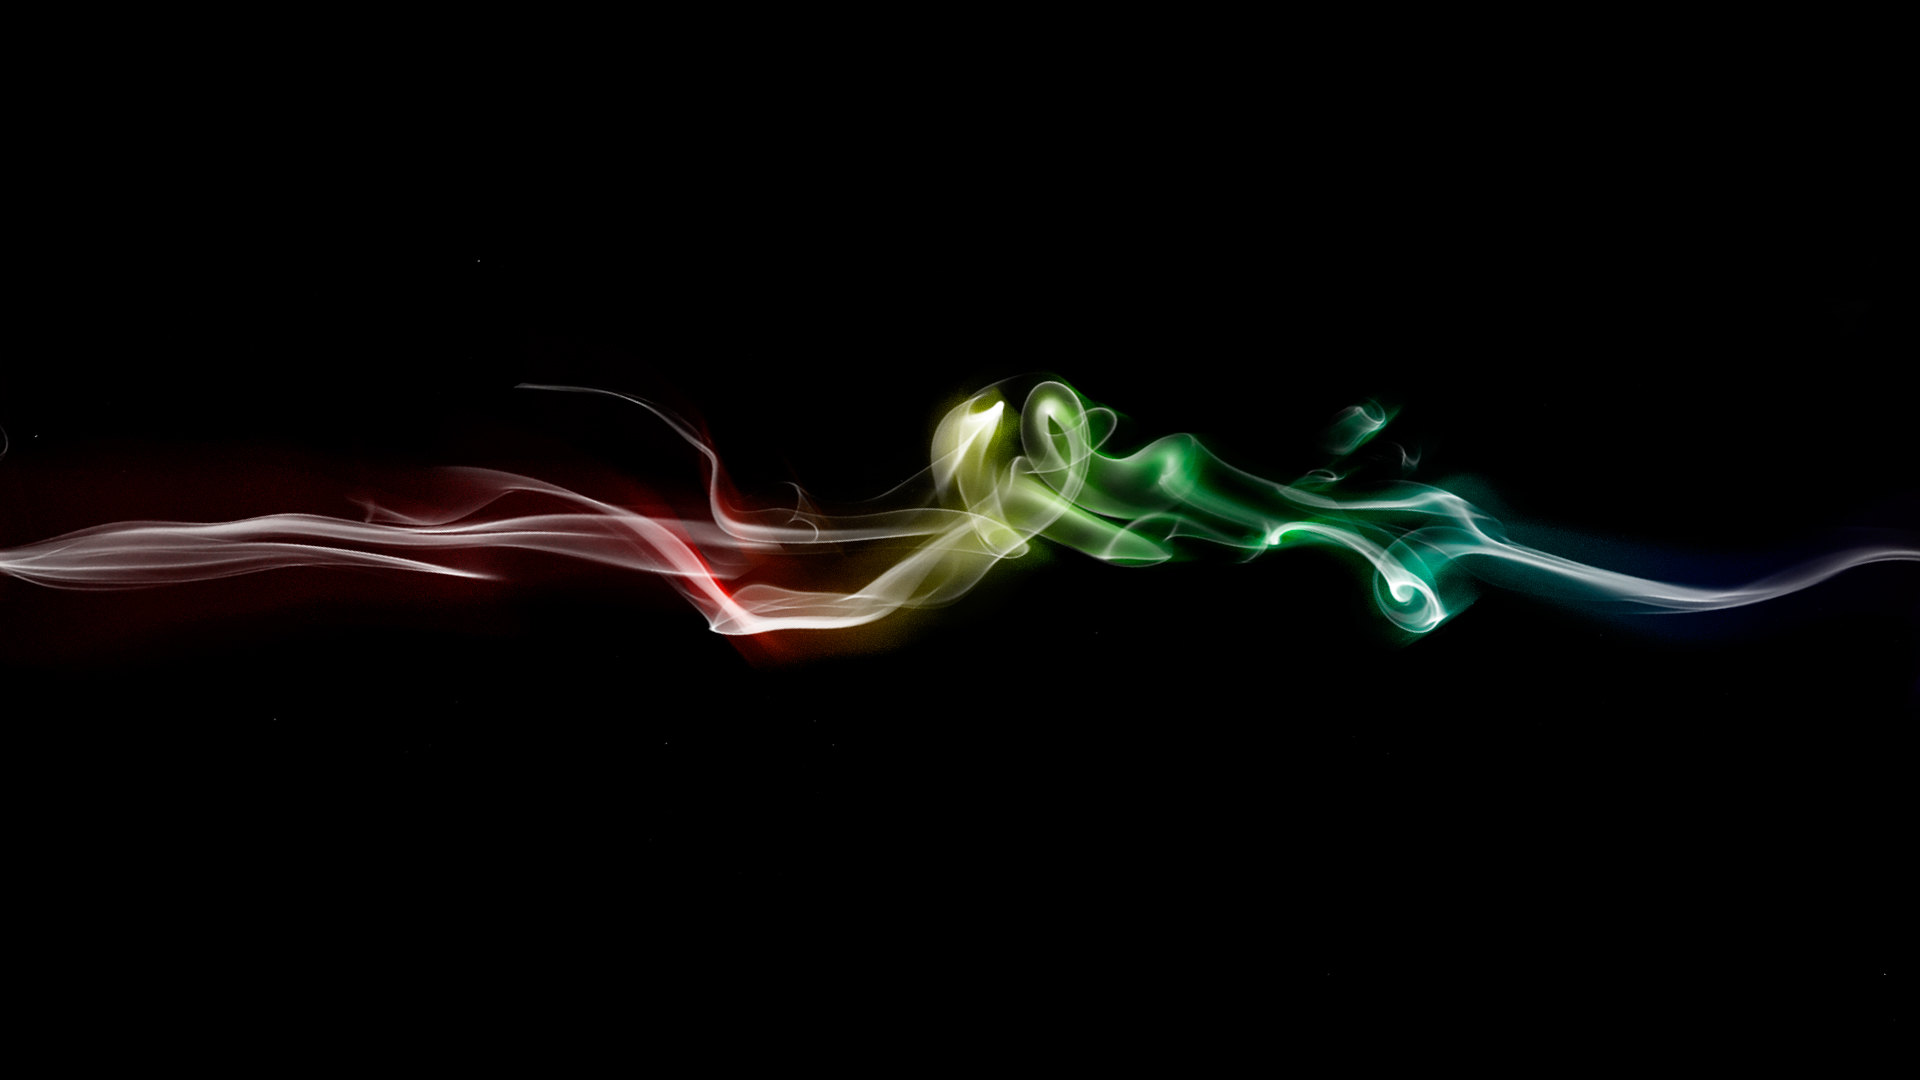 Wallpaper Animated Background Explore Smoke Another